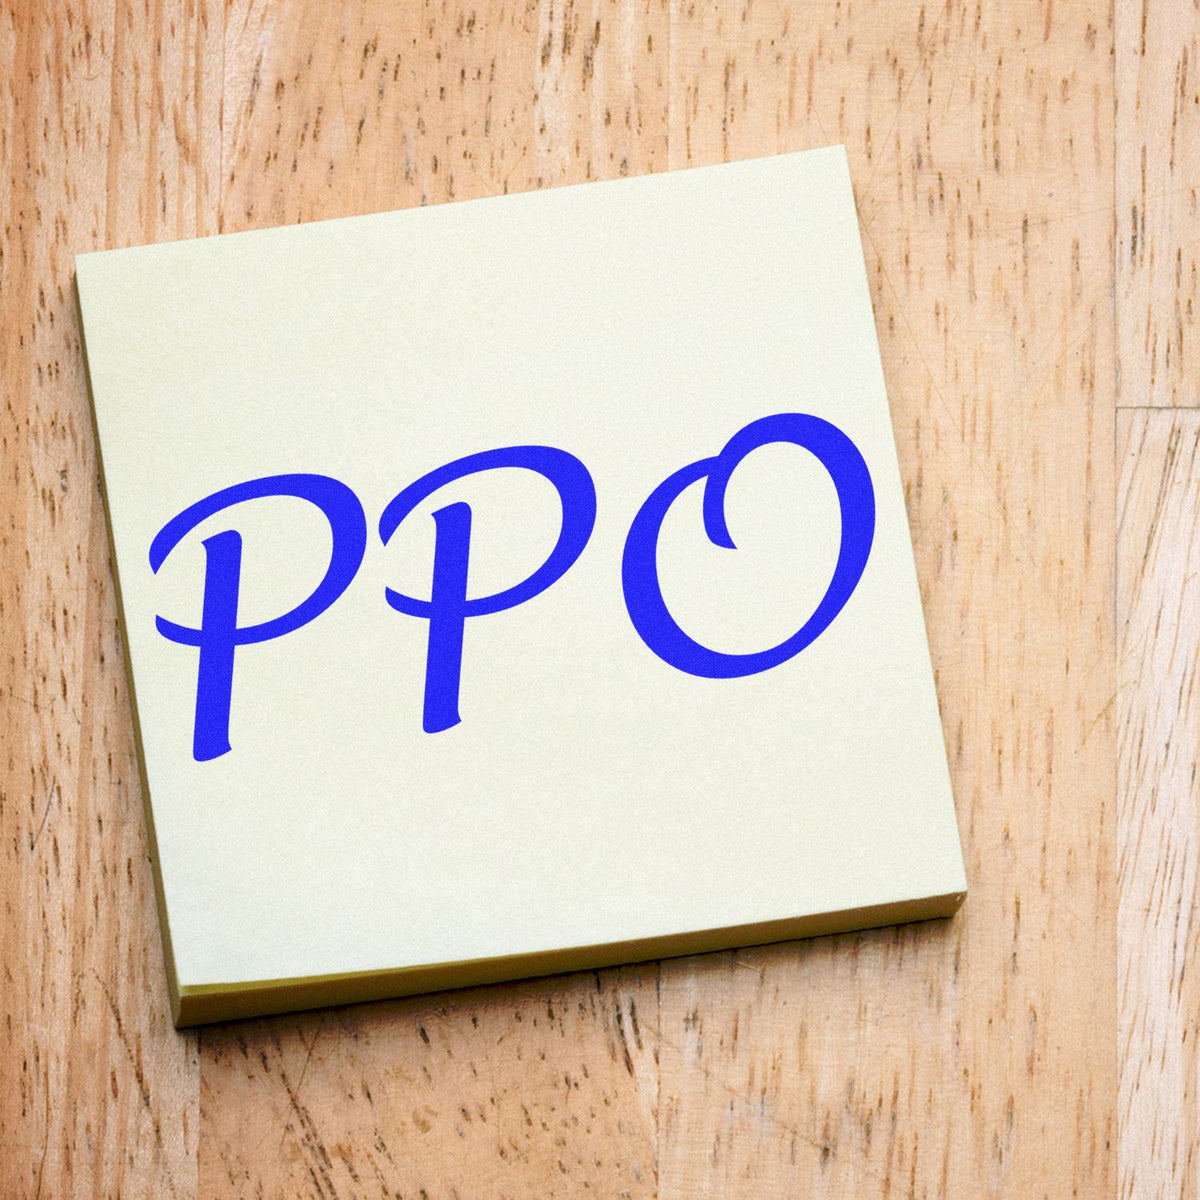 Large PPO Rubber Stamp In Use Photo